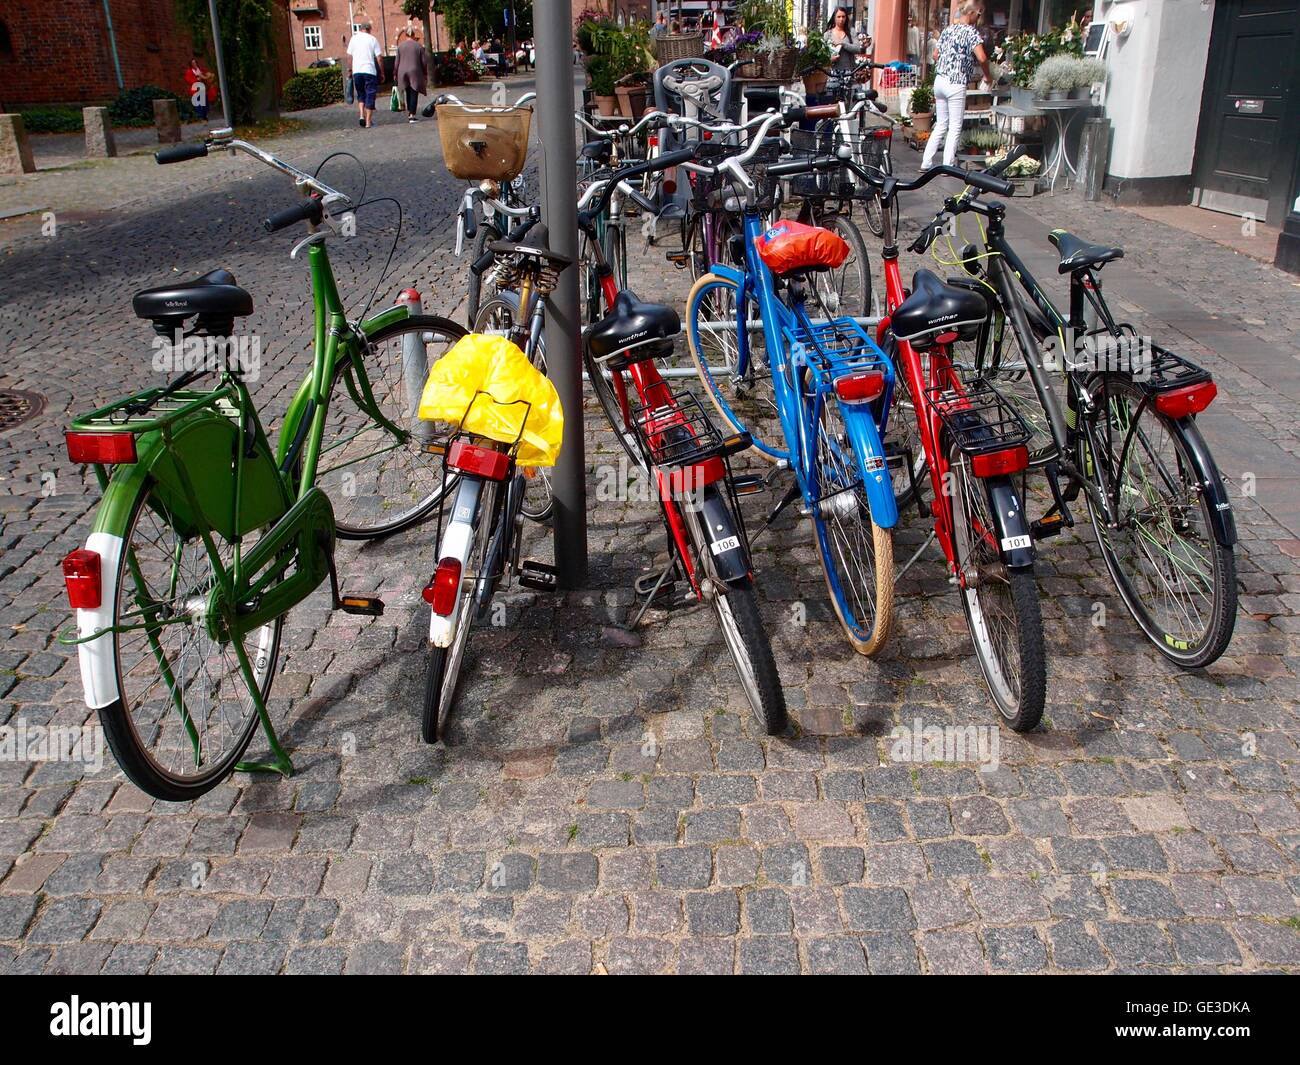 Bicycle stand with colorful bicycles parked, on a cobblestone street. Stock Photo